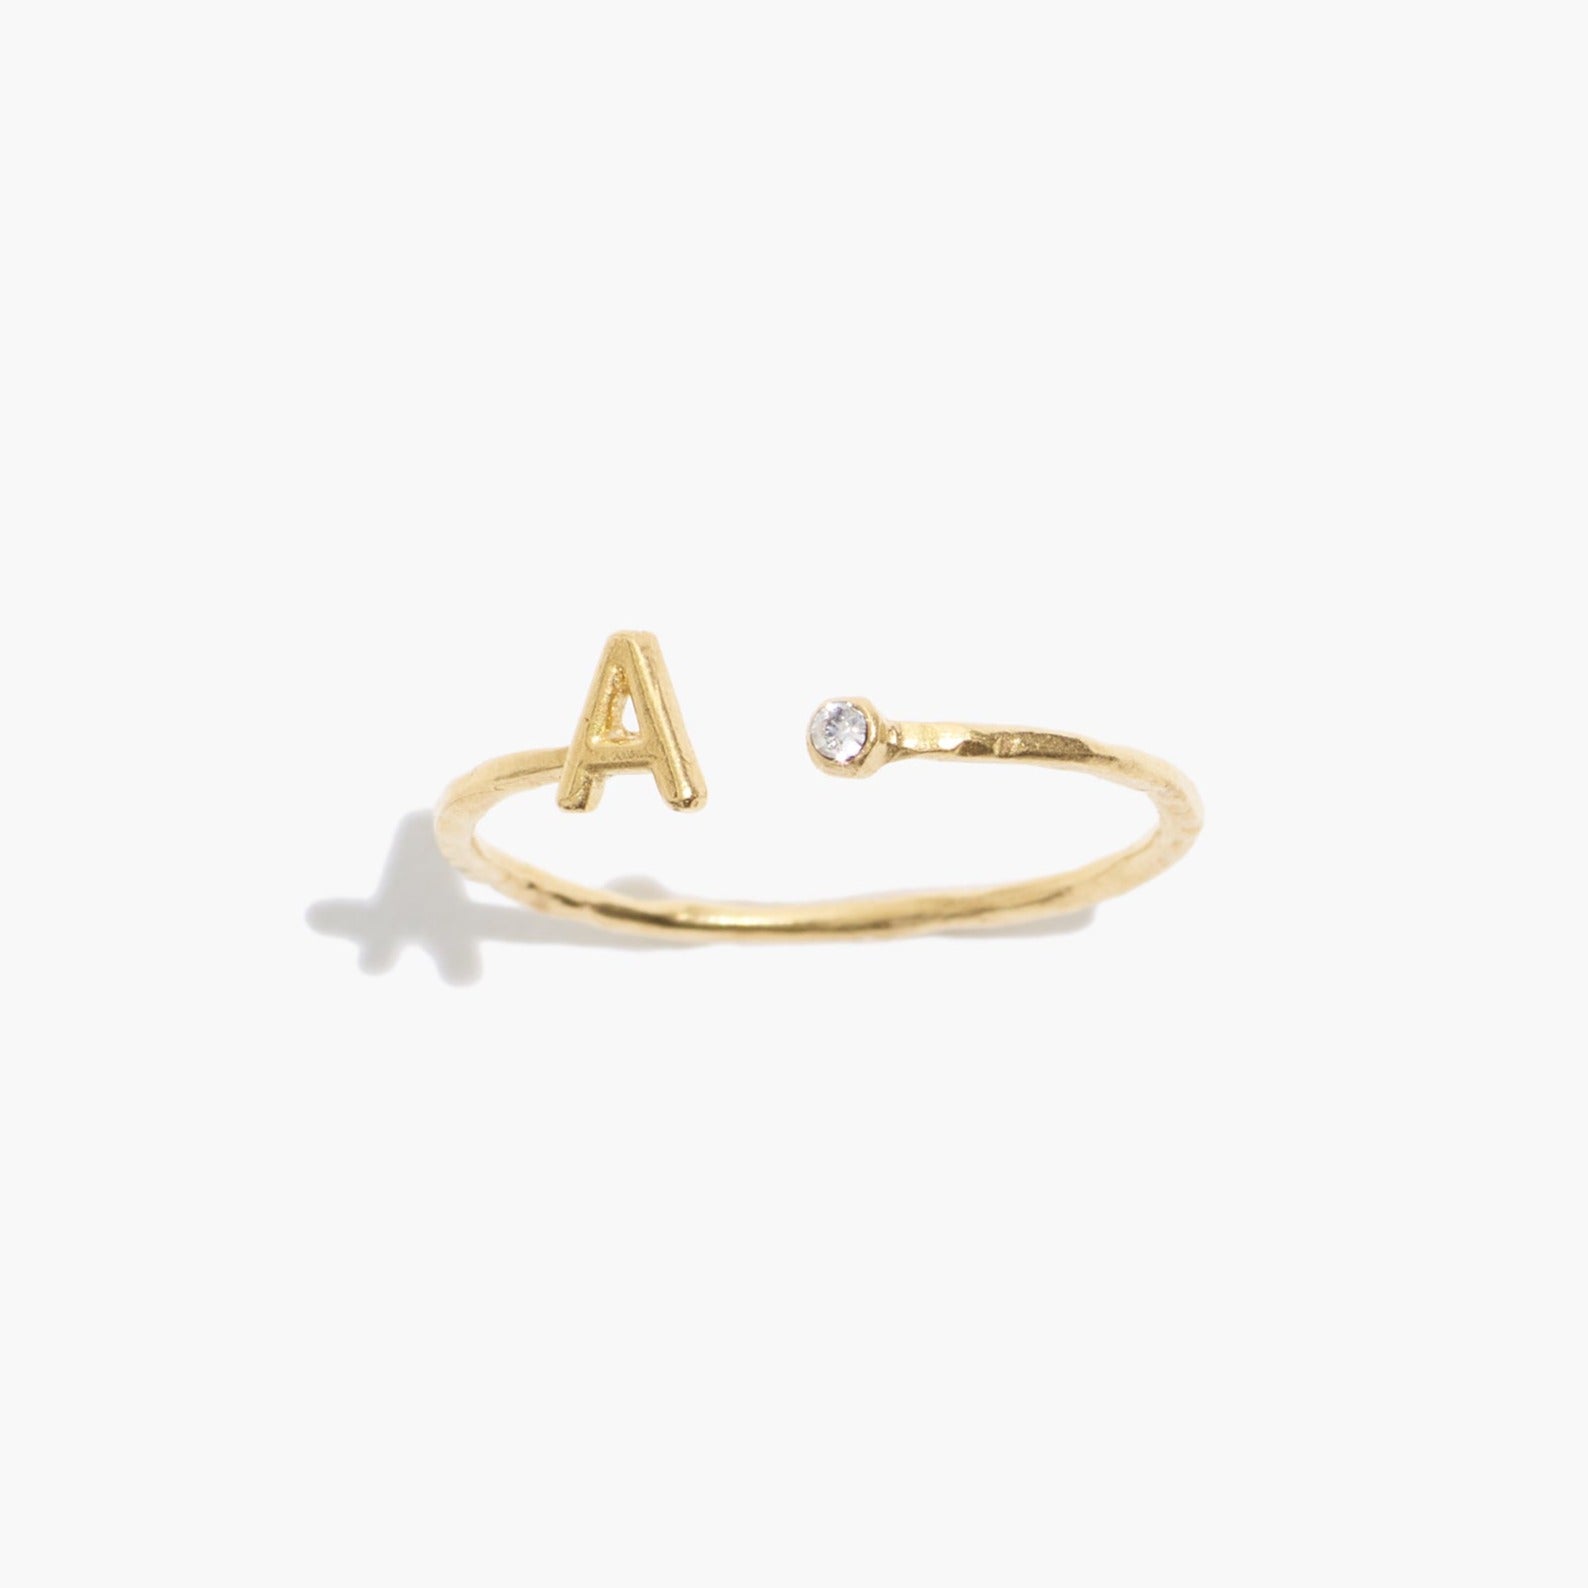 A_Katie_Dean_Initial_Ring_made in America, delicate adjustable stacking ring